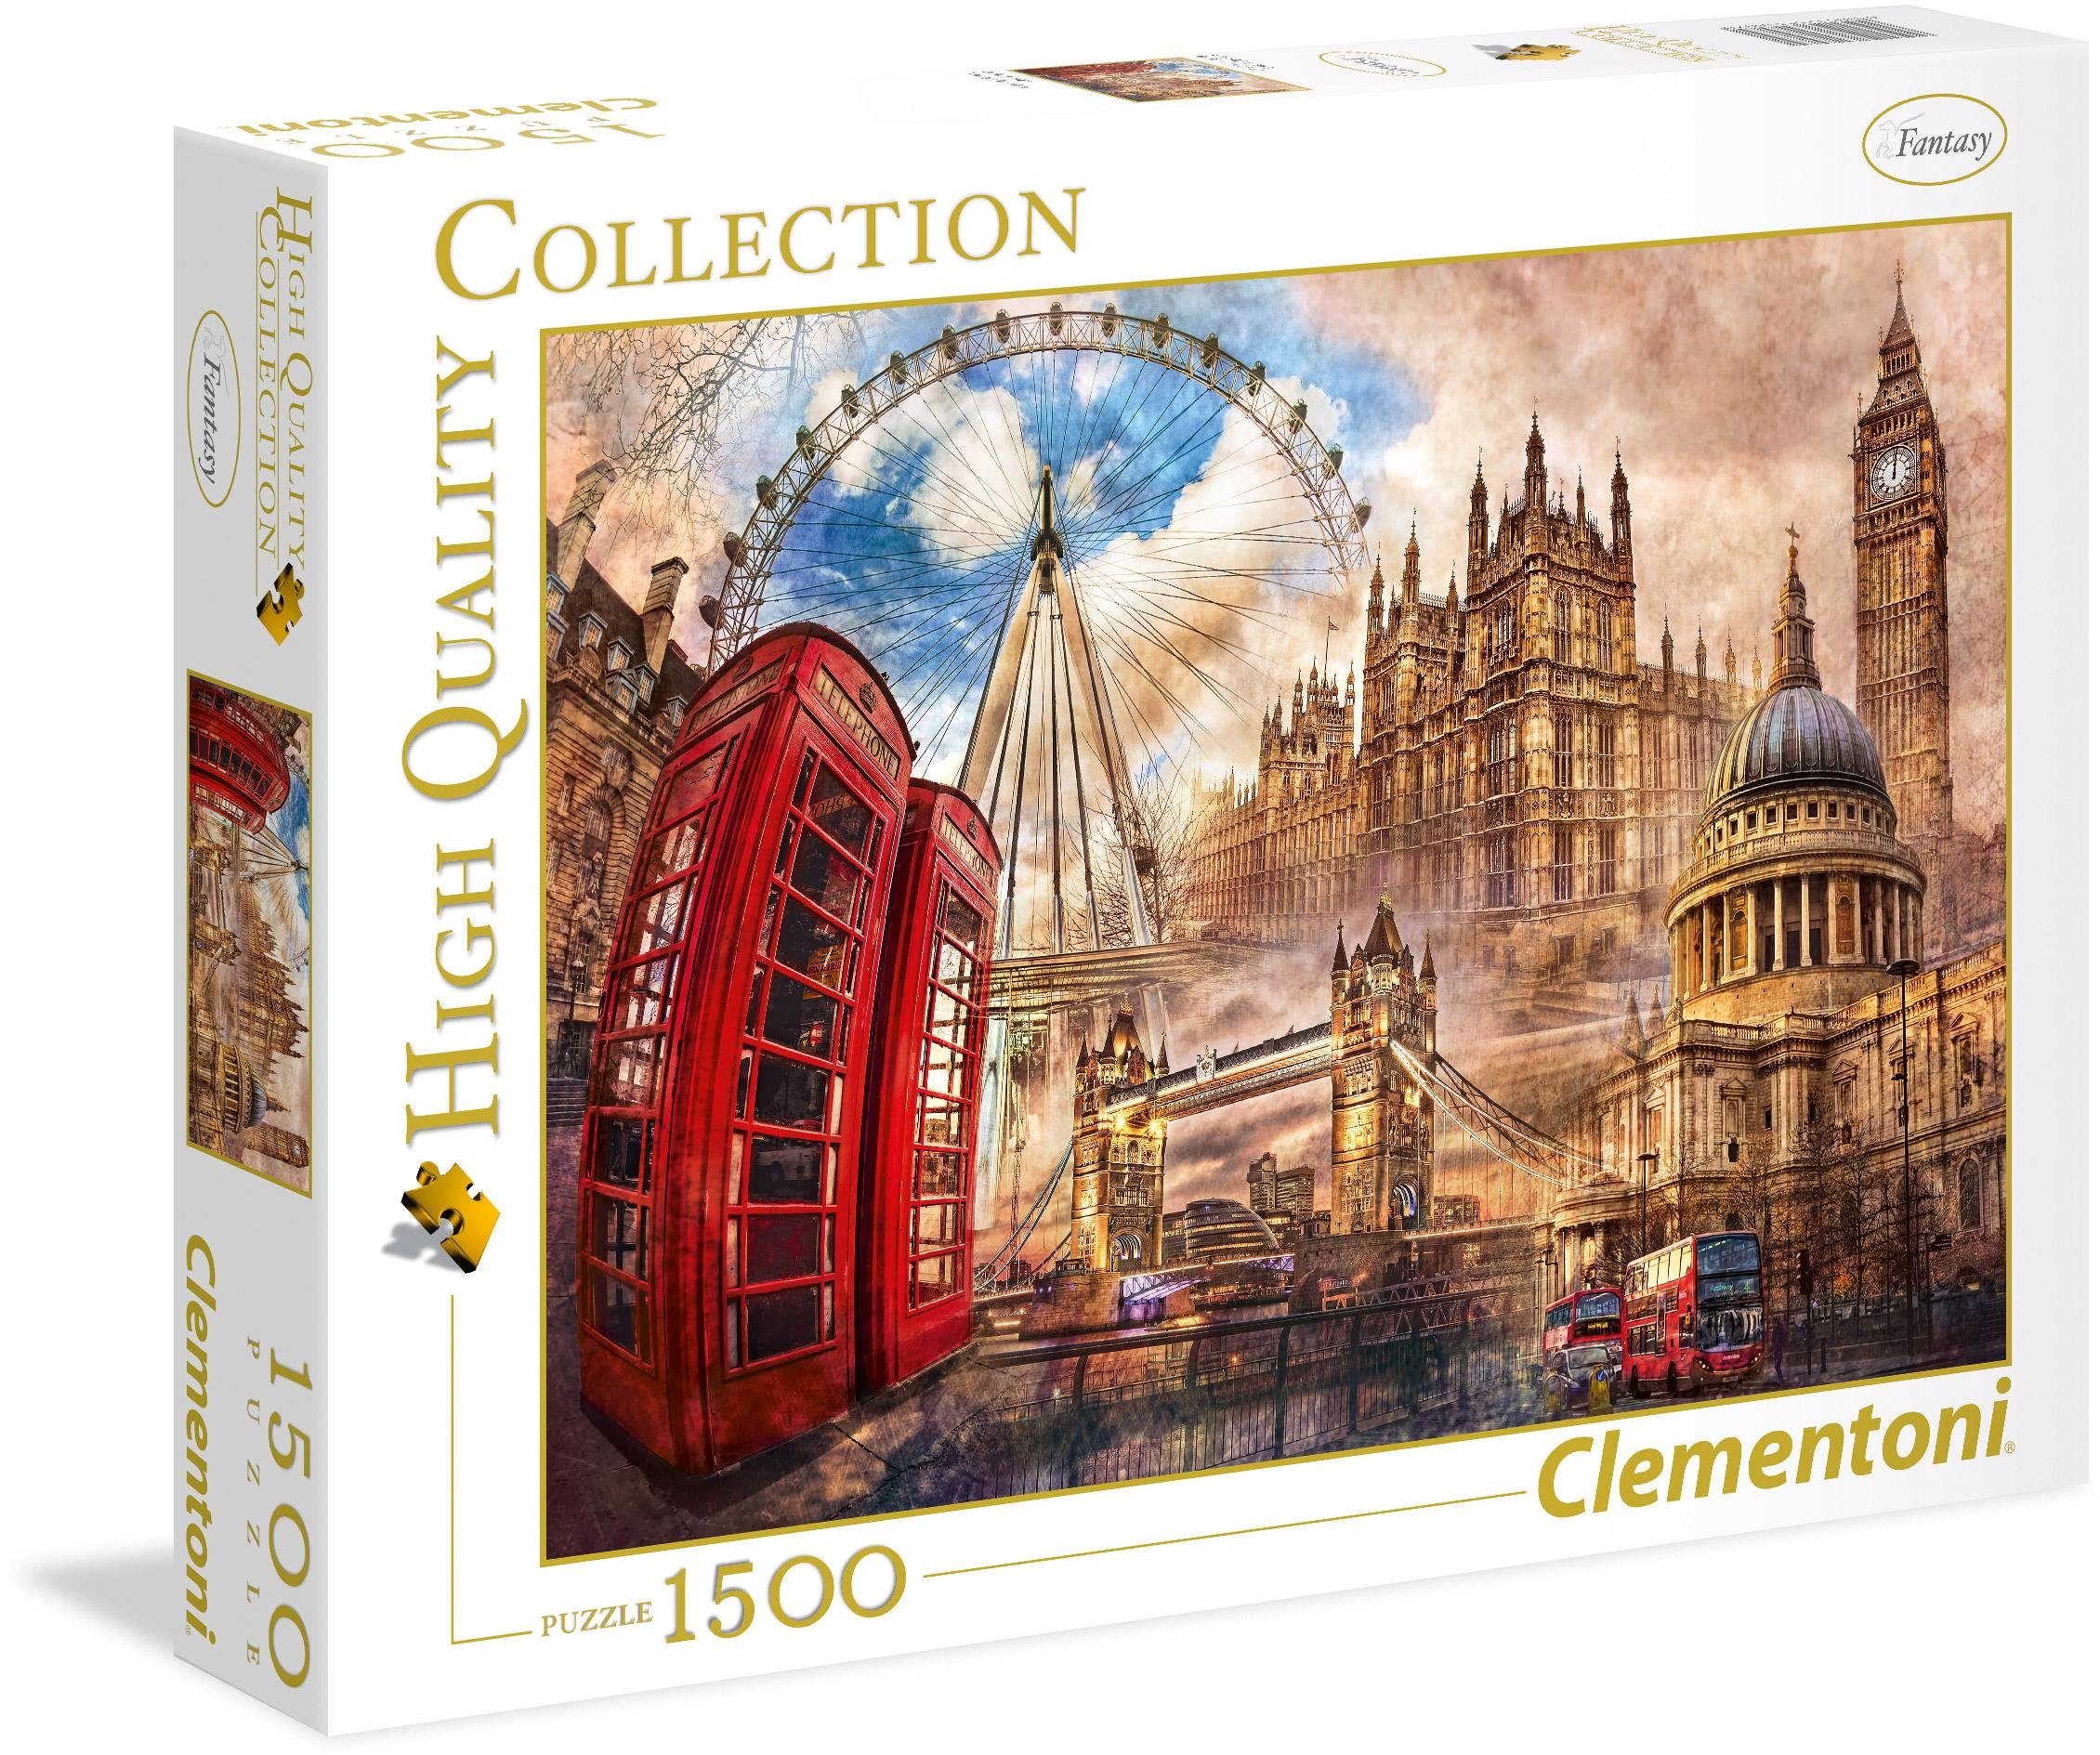 Altes Puzzle Made London, Collection, Clementoni® Quality 1500 in High Puzzleteile, Europe